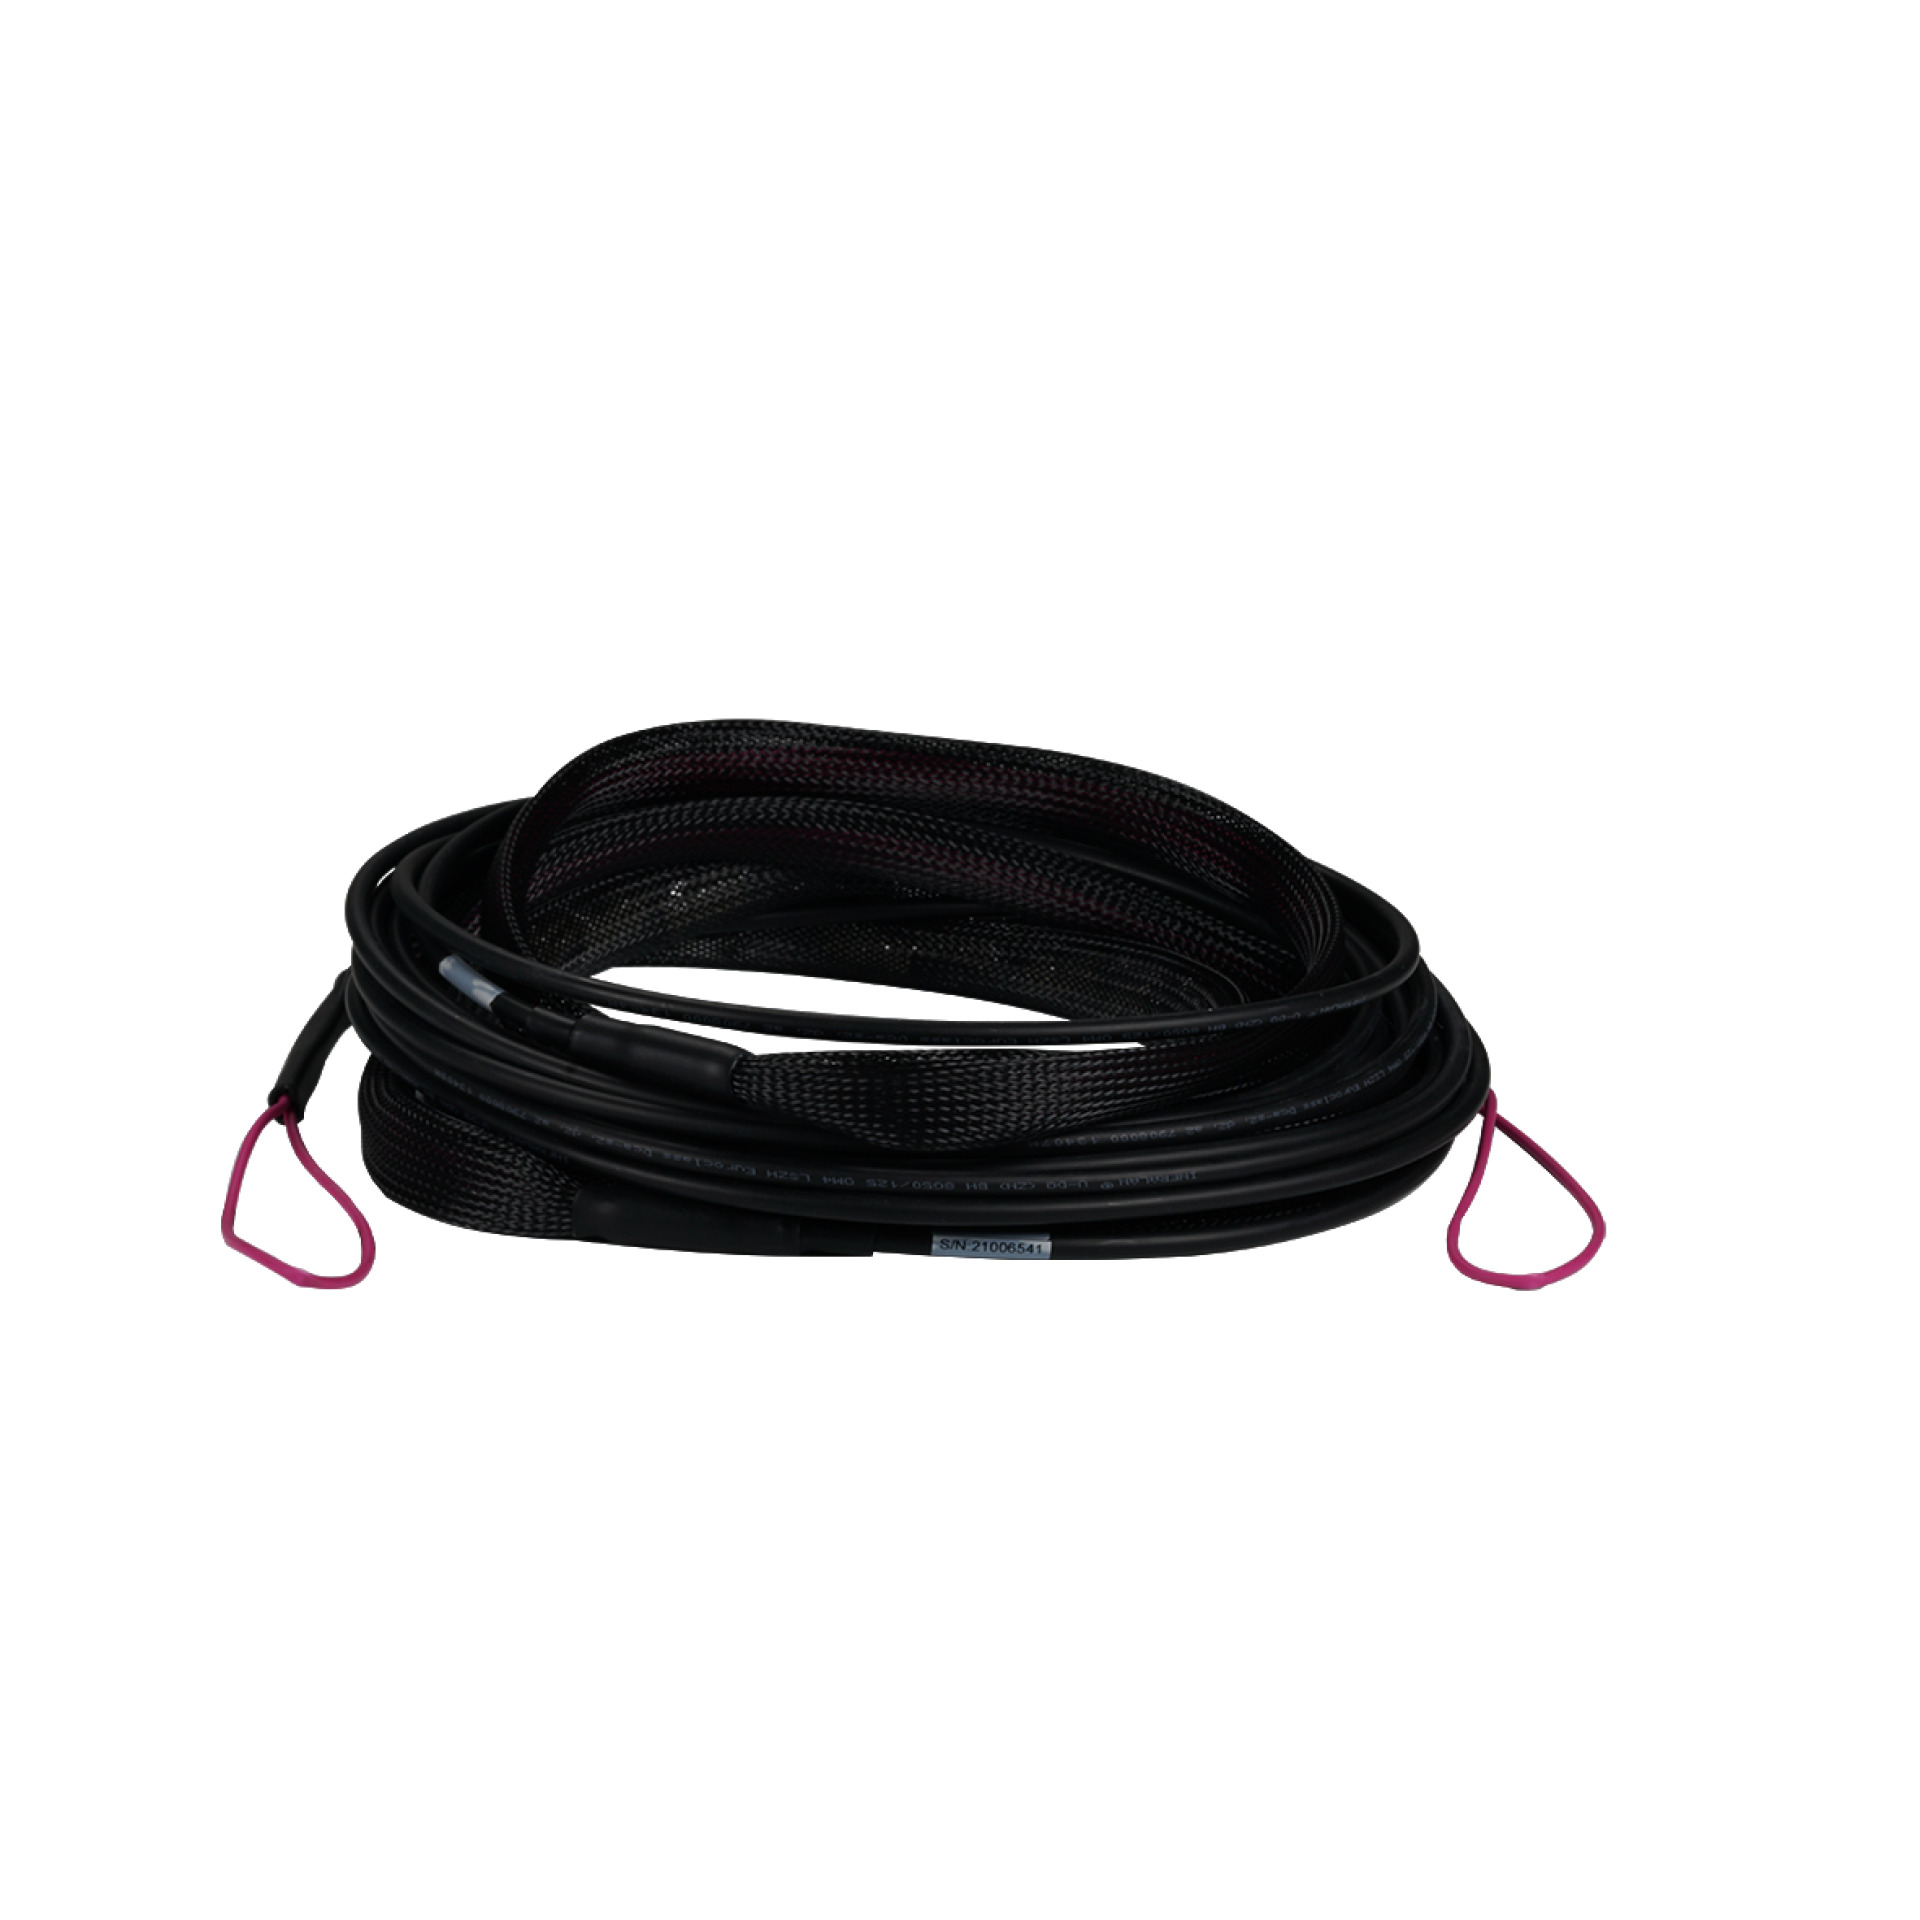 Trunk cable U-DQ(ZN)BH 4G 50/125, SC/SC OM4 60m